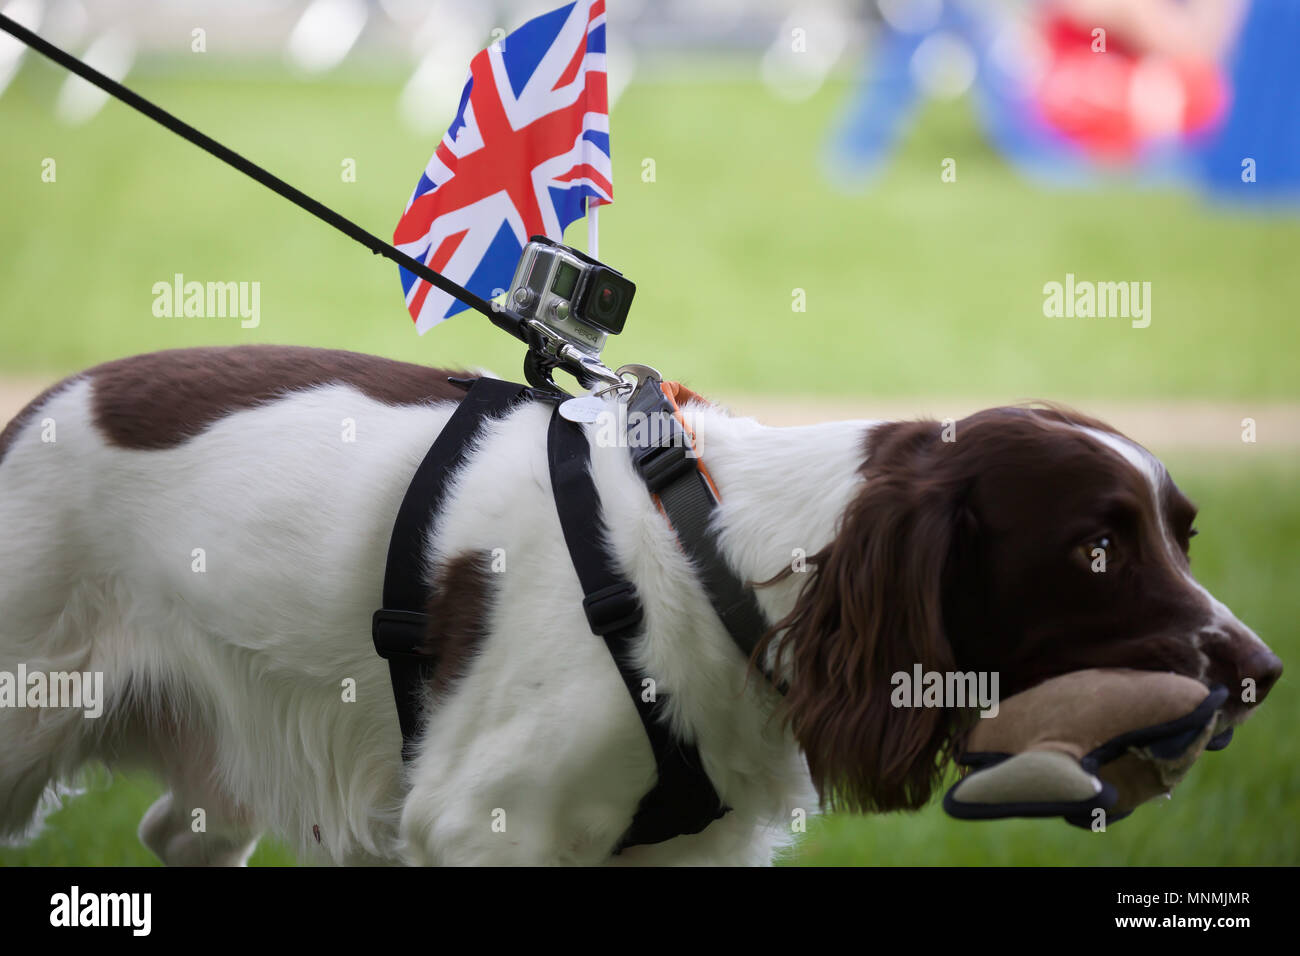 Windsor,UK,18th May 2018,A Cocker Spaniel joins in the celebrations with a Union Jack flag attached to its harness and a stuffed toy in its mouth as The Royal Wedding preparations get underway.Credit Keith Larby/Alamy Live News Stock Photo